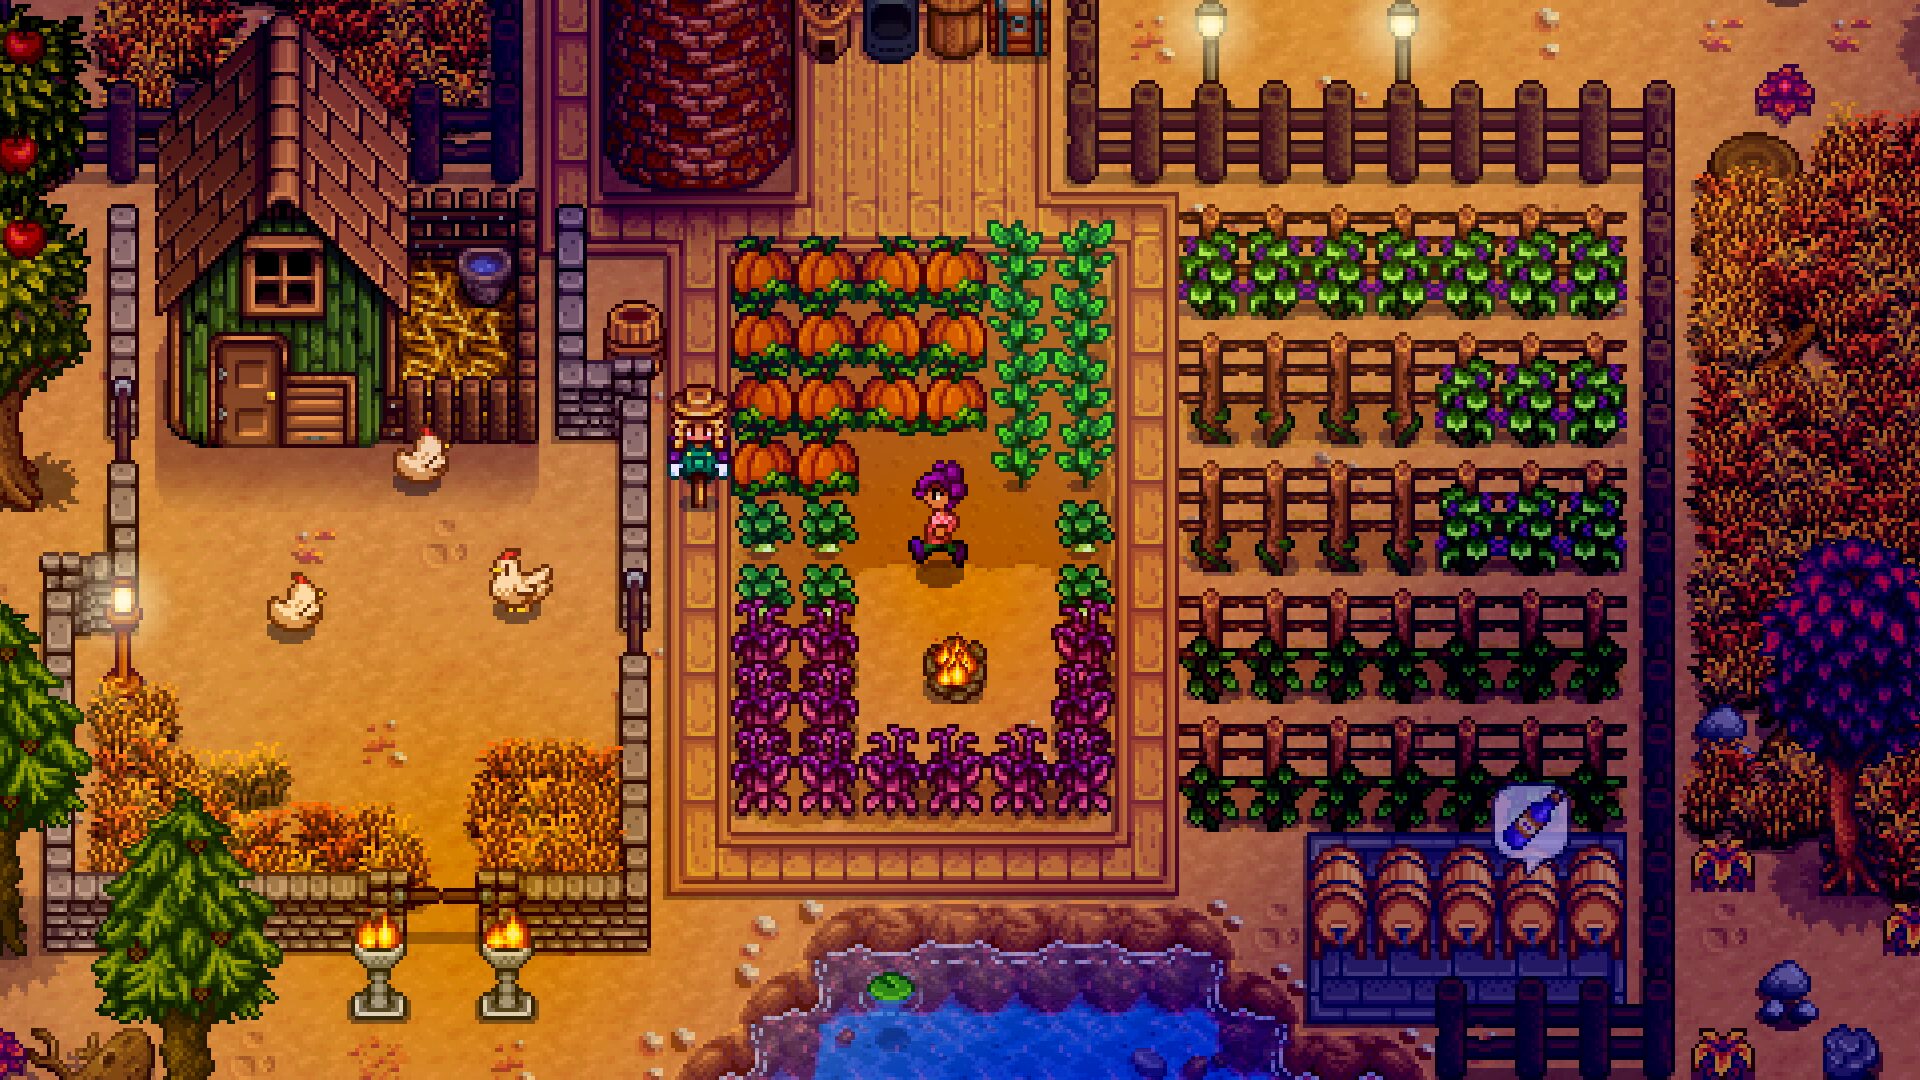 Stardew Valley multiplayer hits PlayStation 4, but fails to get on Xbox One